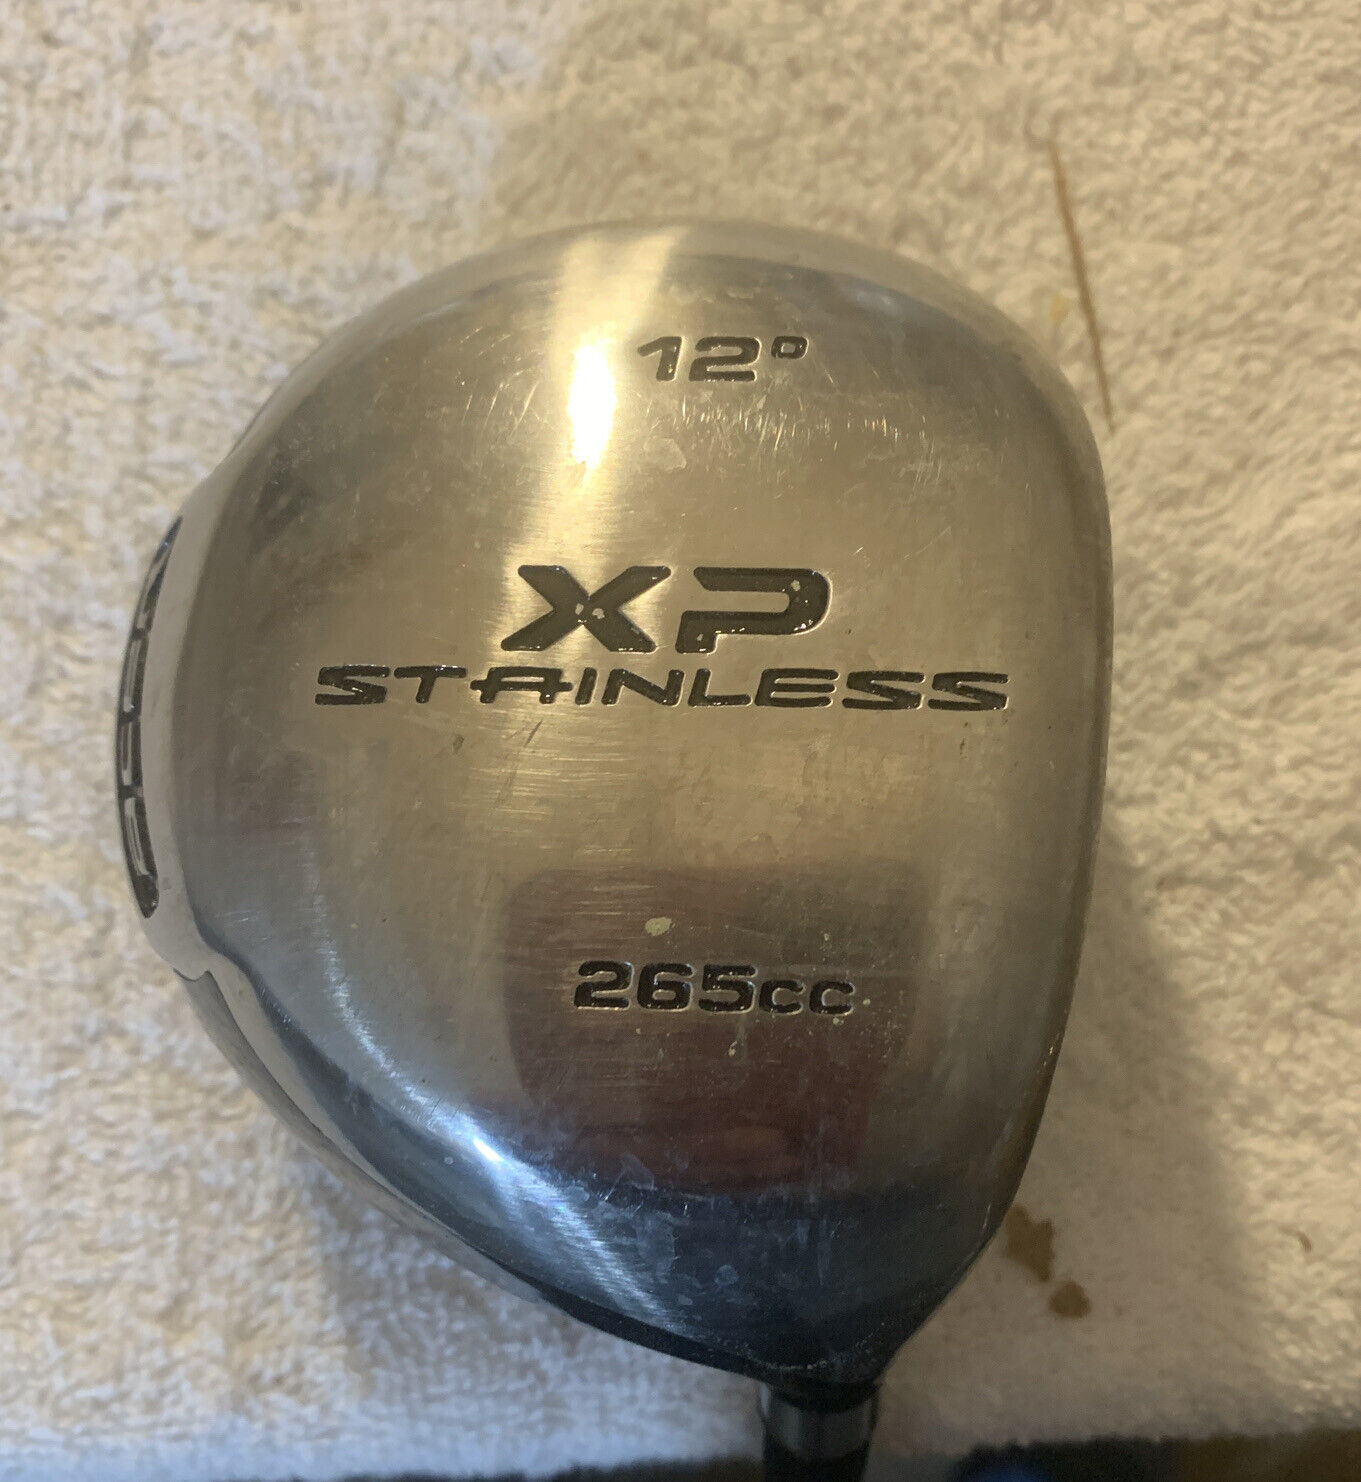 Acer XP Stainless 12 Degree 44.5 Inch 265cc Driver Right Hand Stiff Graphite